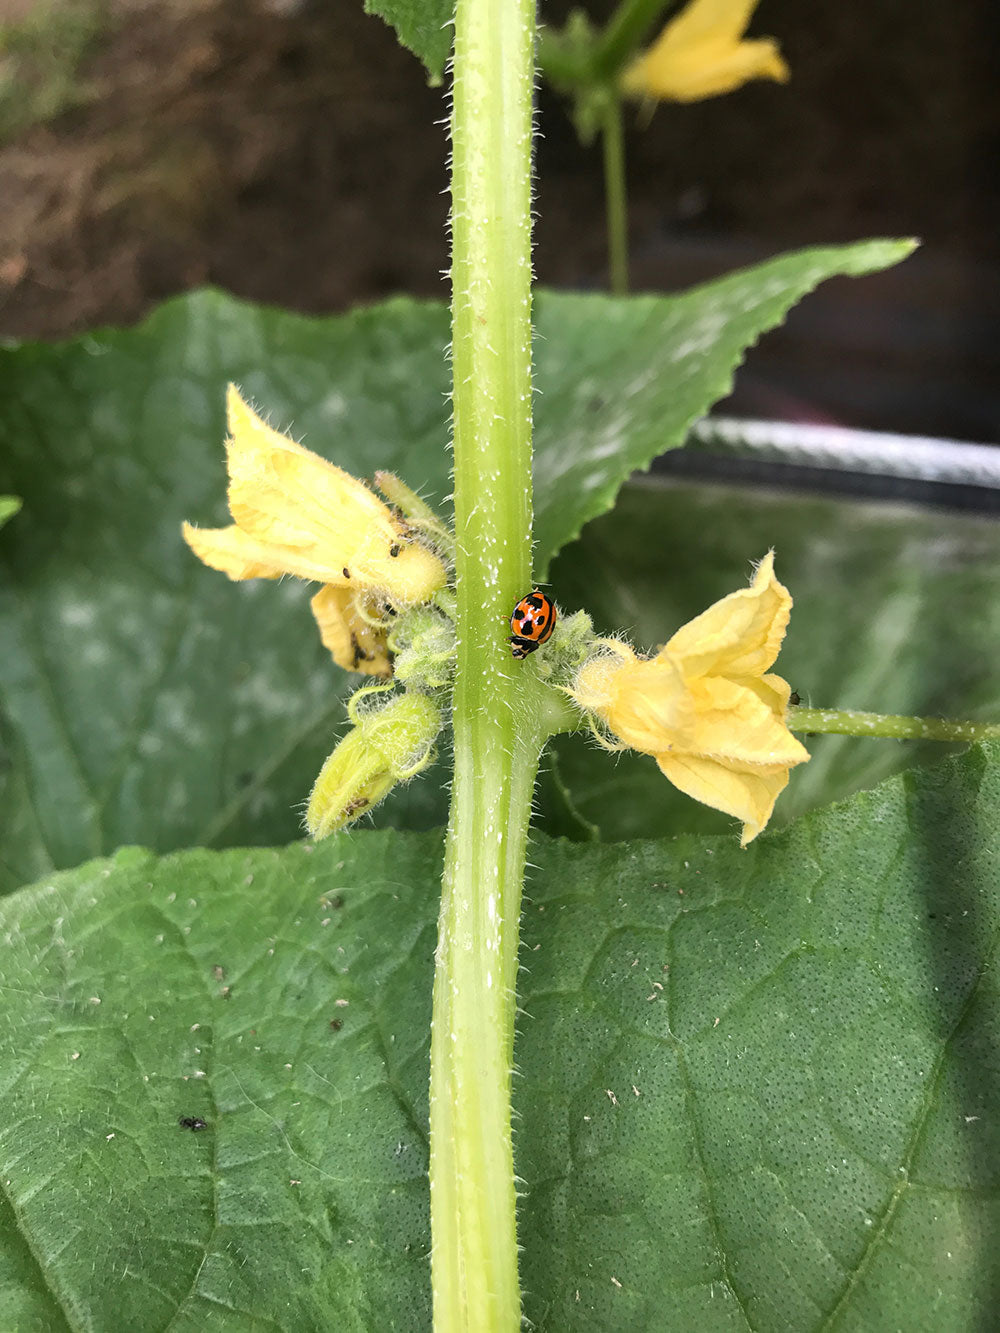 Lady Beetle eating aphids